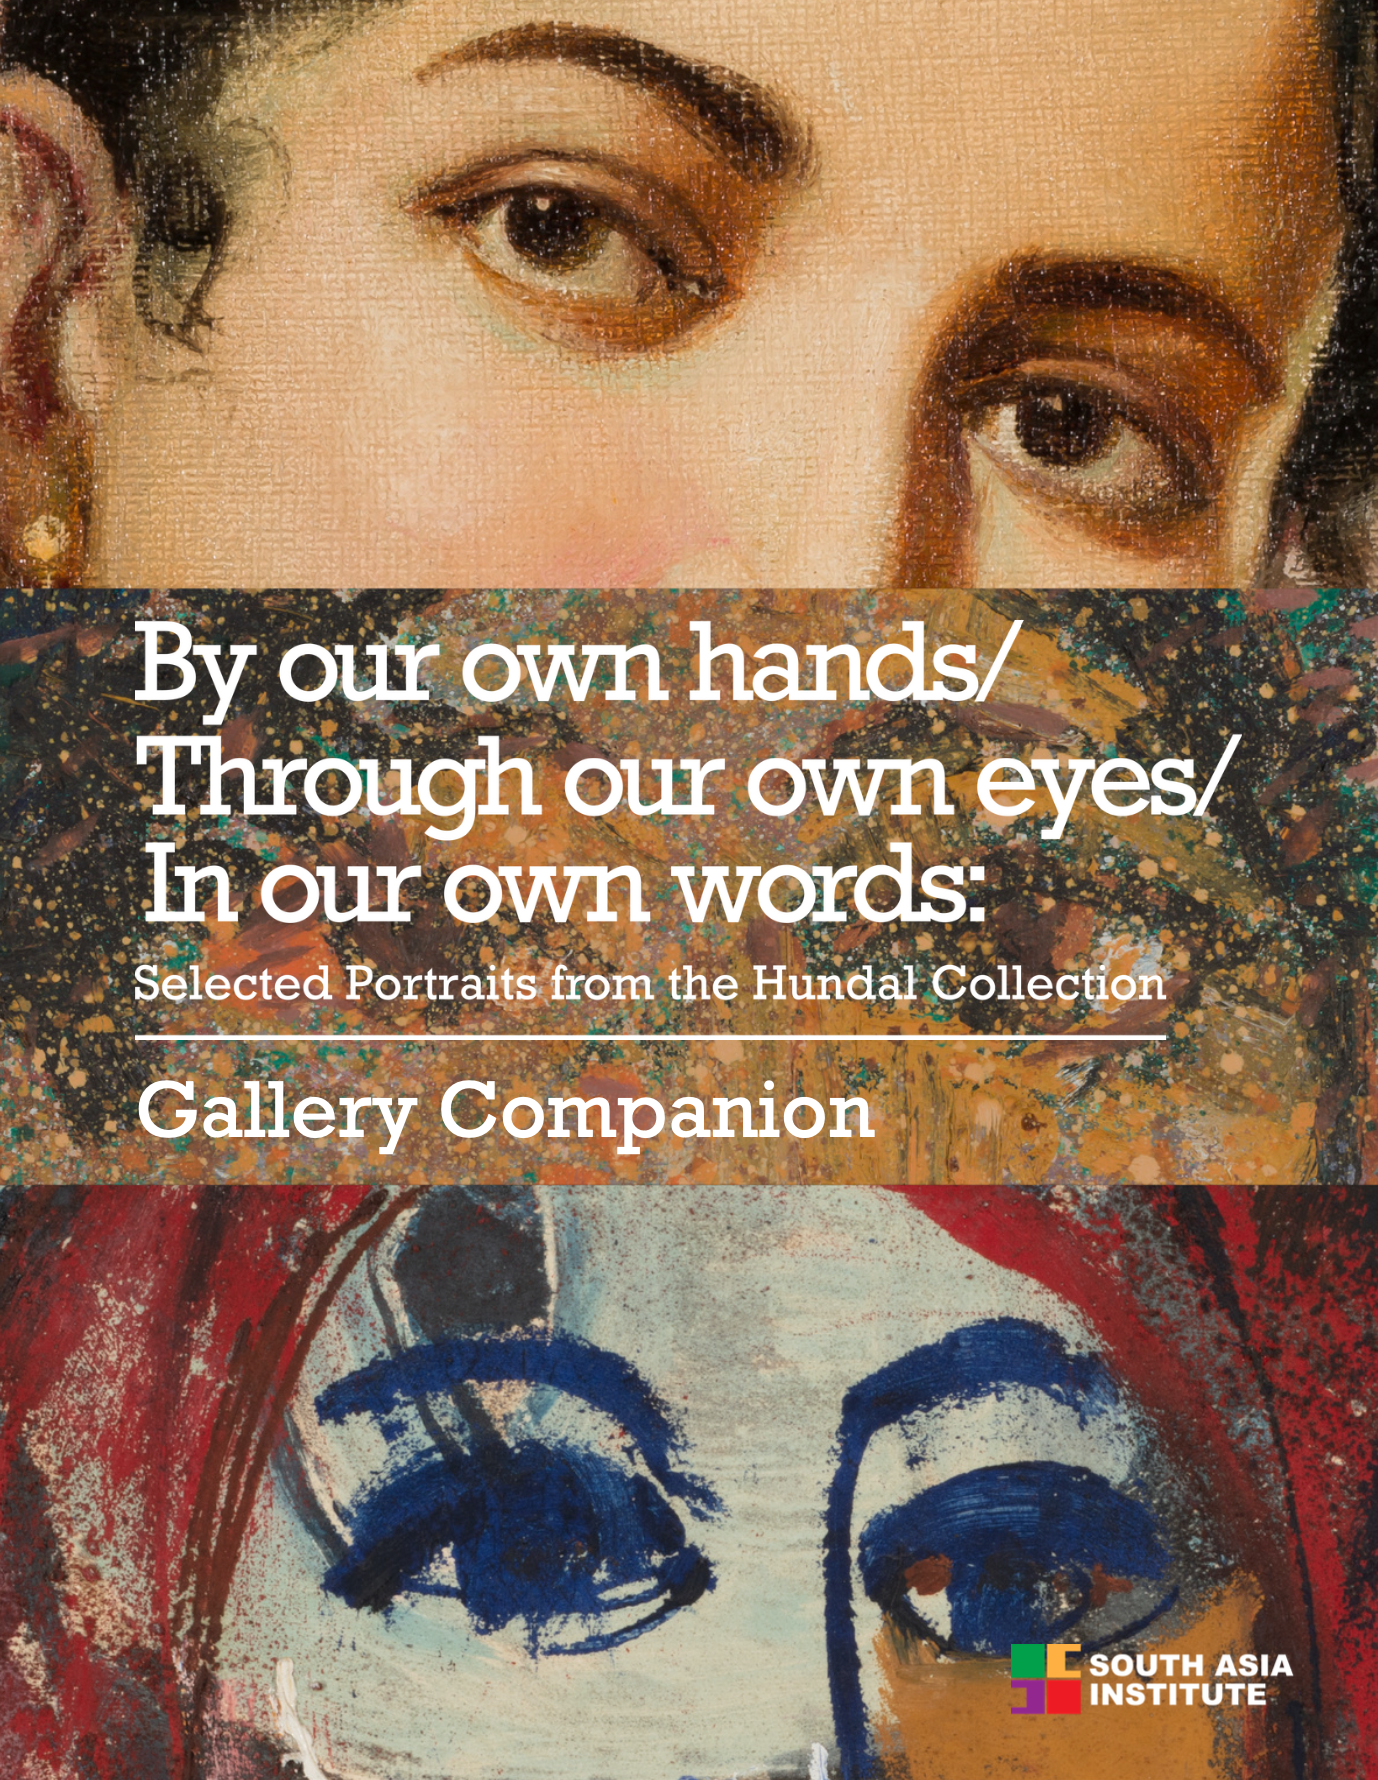 BY OUR OWN HANS / THROUGH OUR OWN EYES / IN OUR OWN WORDS: SELECTED PORTRAITS FROM THE HUNDAL COLLECTION